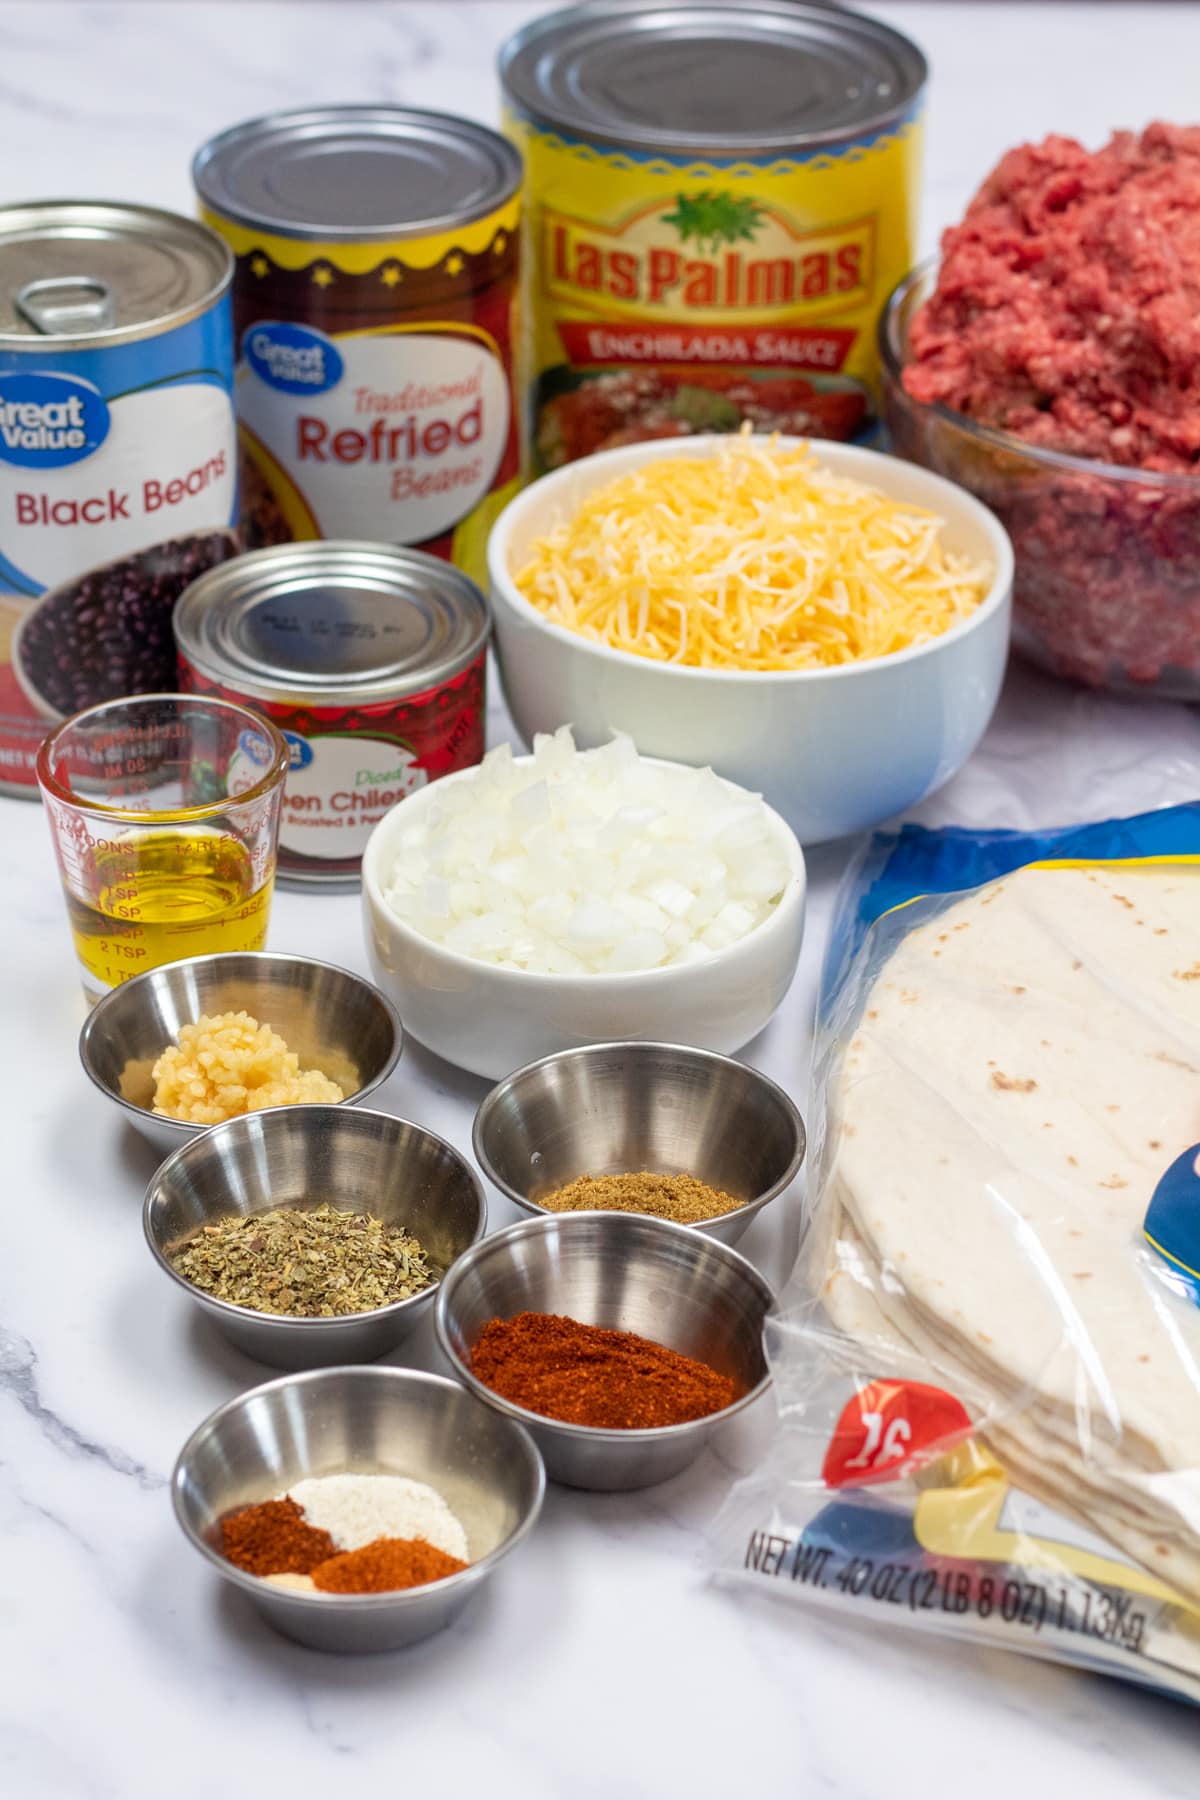 Photo showing ingredients needed for beef enchiladas.